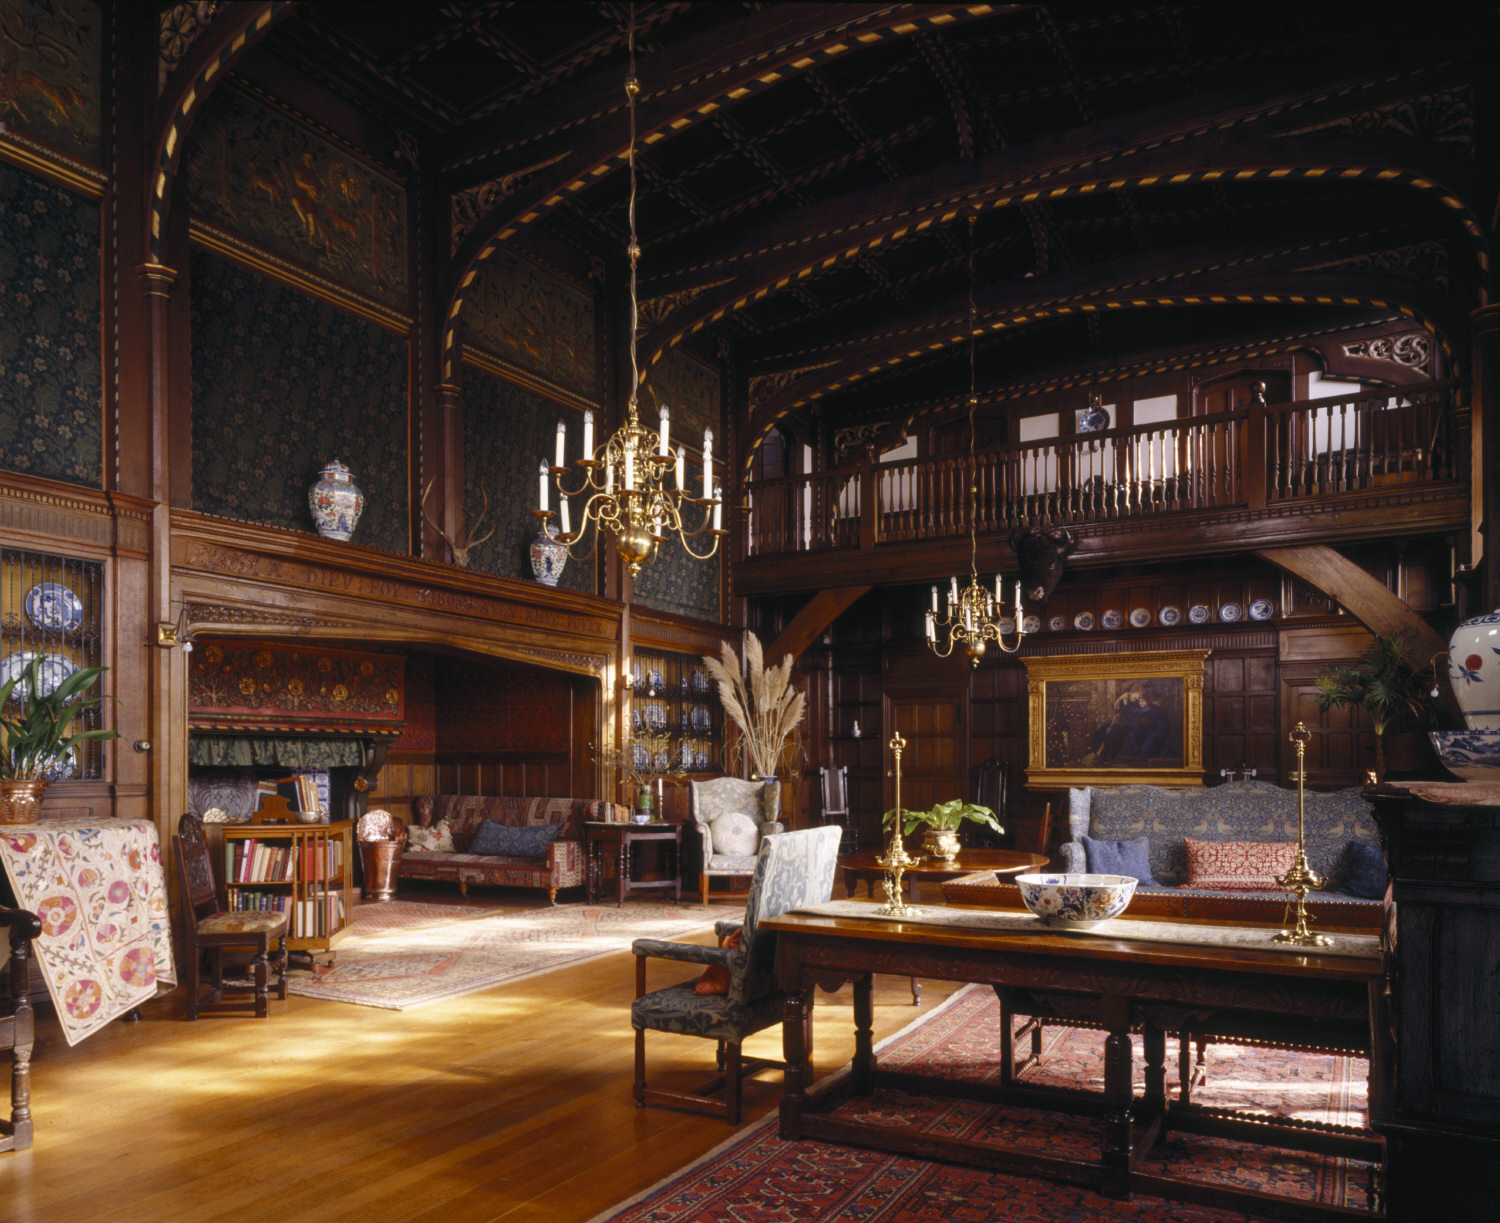 A photograph showing the large, wood-panelled interior of the Great Parlour at Wightwick Manor, Wolverhampton, filled with Arts and Crafts furniture and decorative objects. The wooden ceiling features decorative painting and two large brass chandeliers.